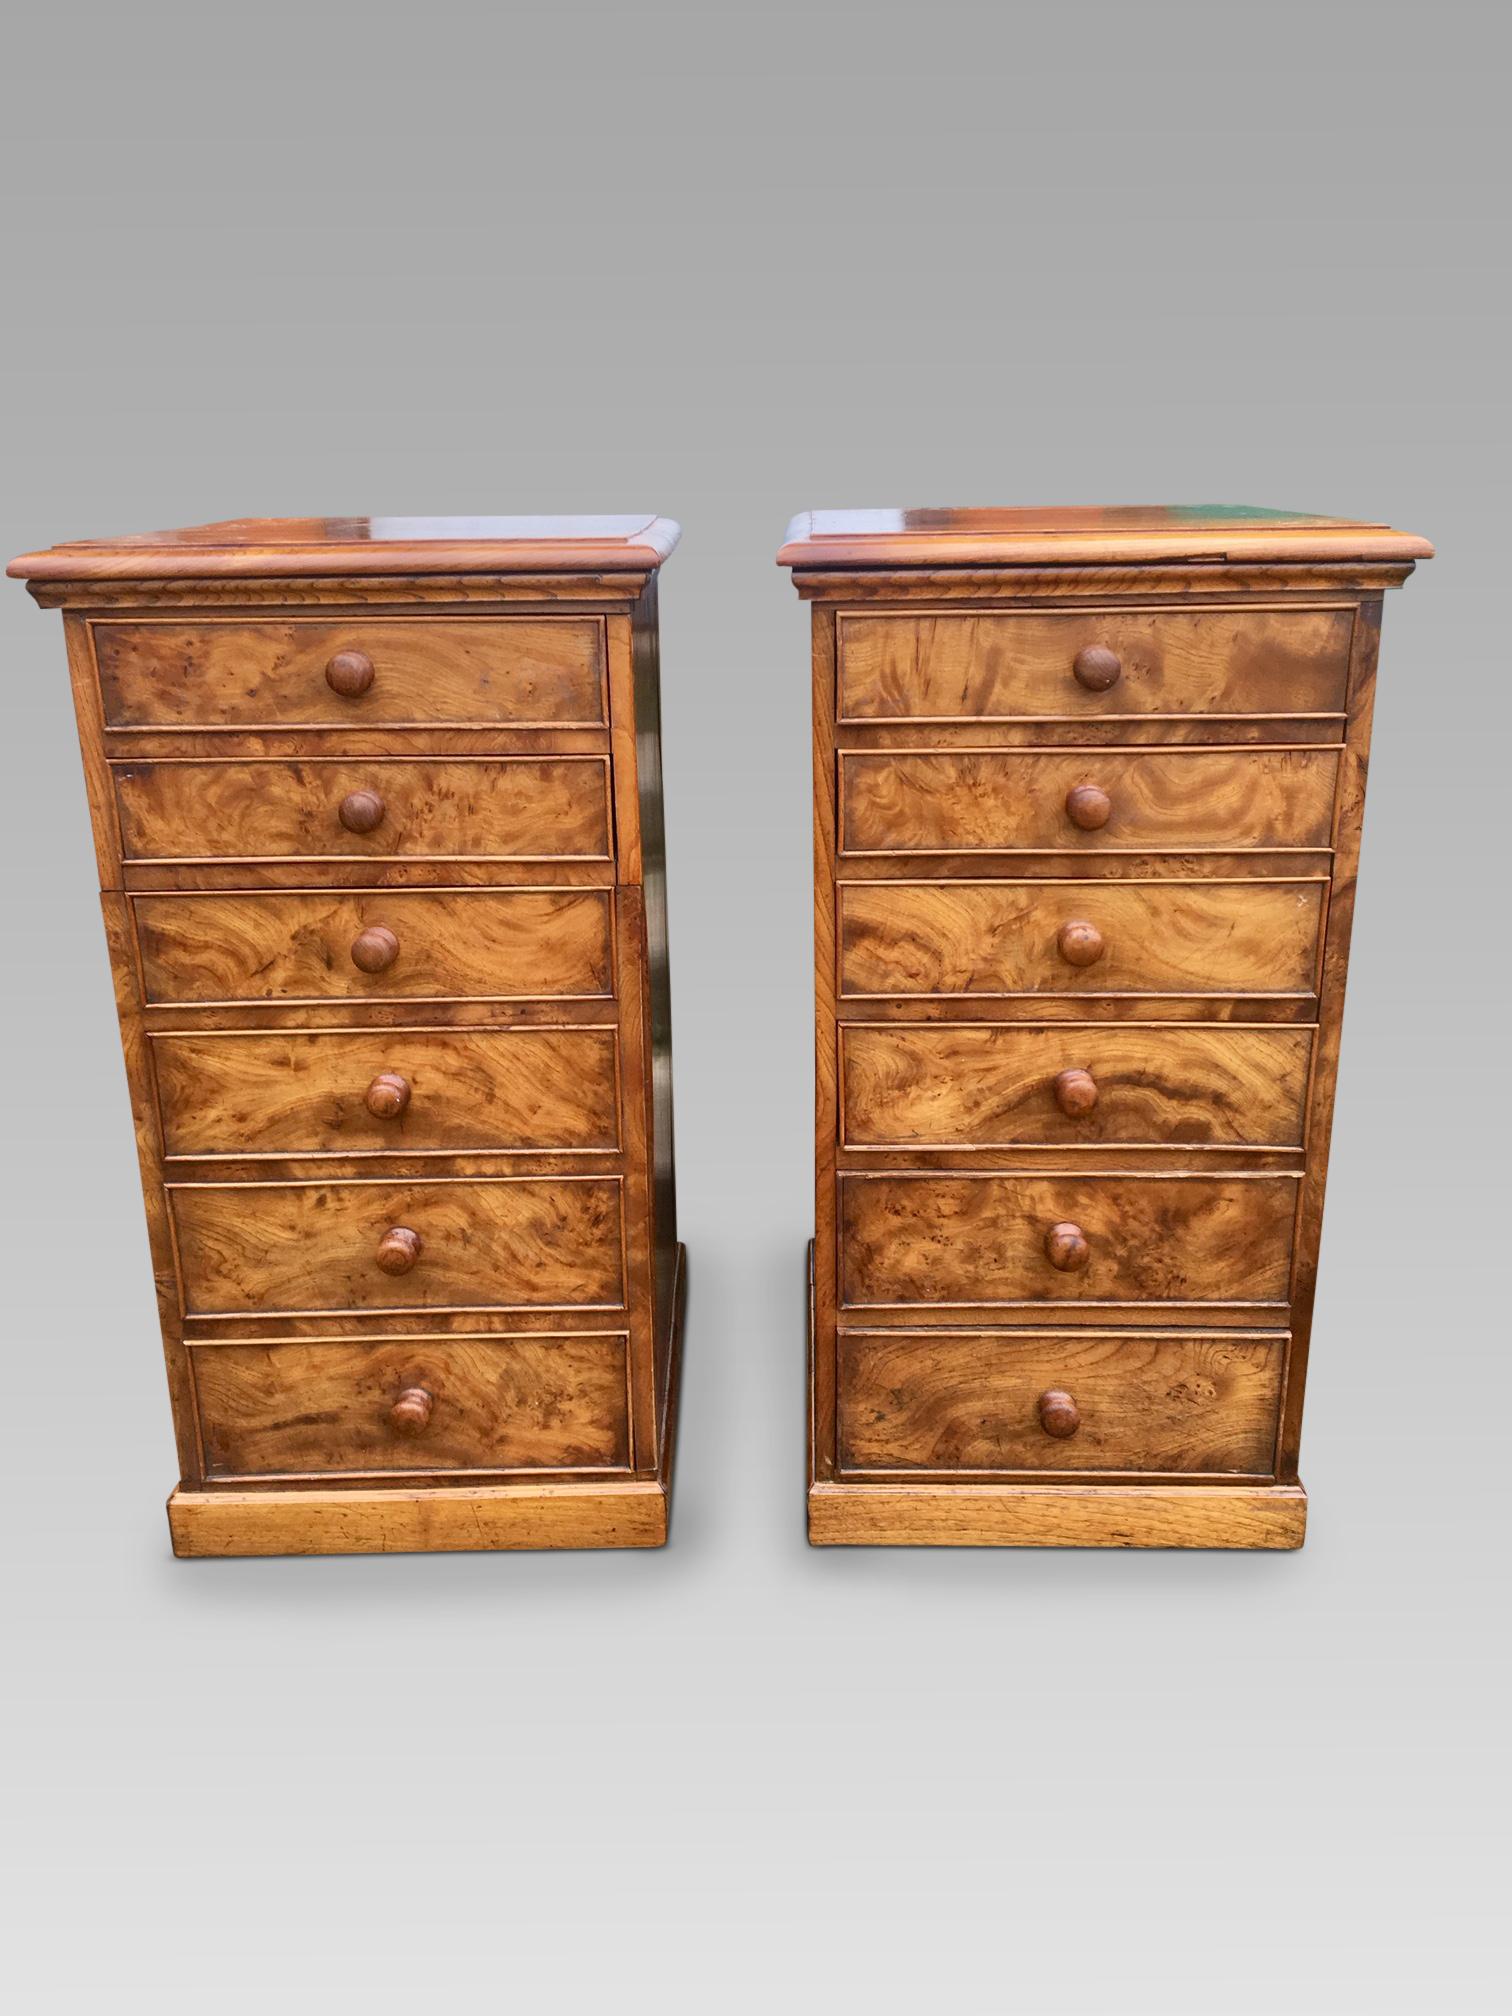 Attractive pair of English Burr Elm bedside cabinets of good size.
These delightful cabinets have been refurbished in our workshops. They have been cleaned and wax polished.
The cabinets have a plinth base, stand 31 ins high, 18 ins deep and 17 ins